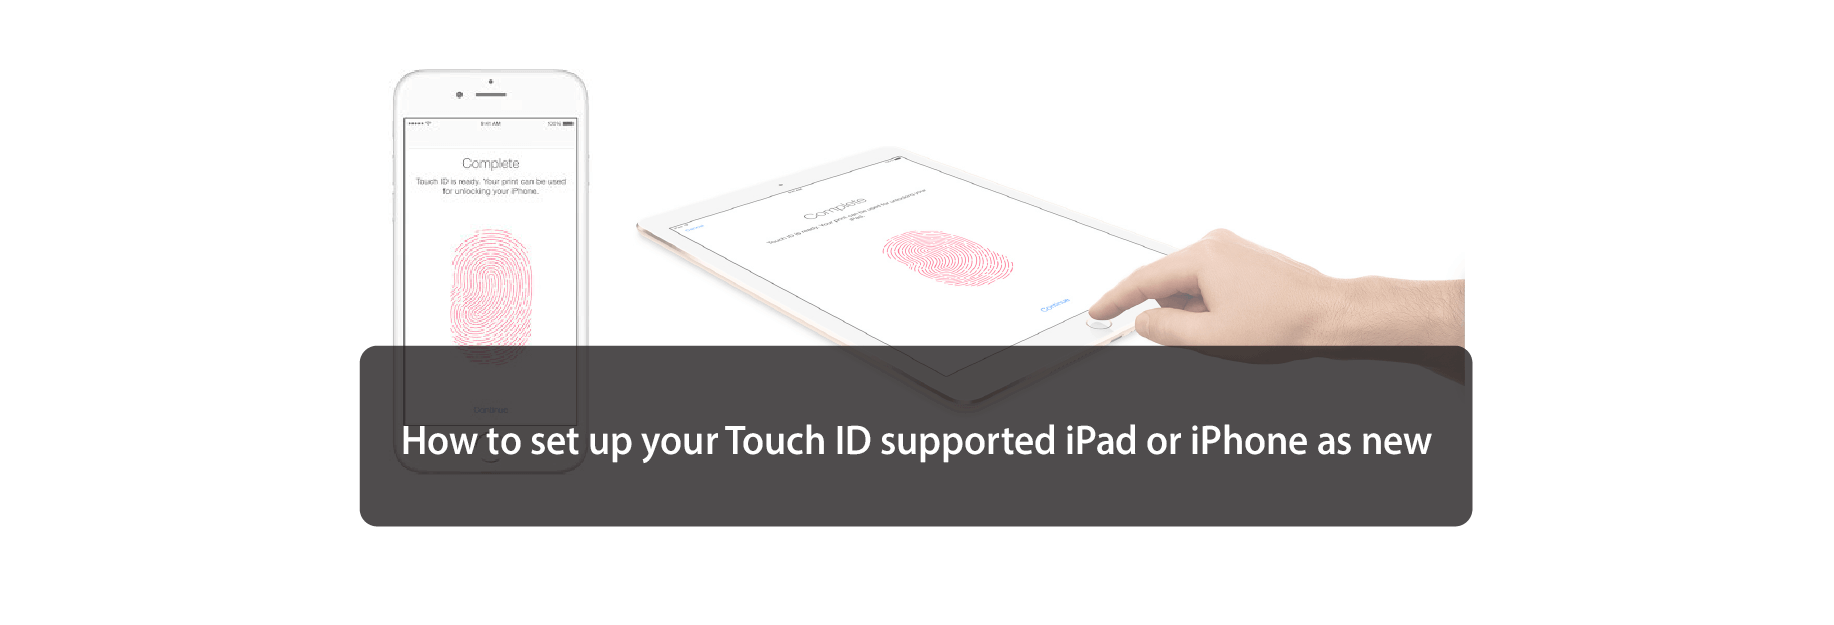 How to set up your Touch ID supported iPad or iPhone as new